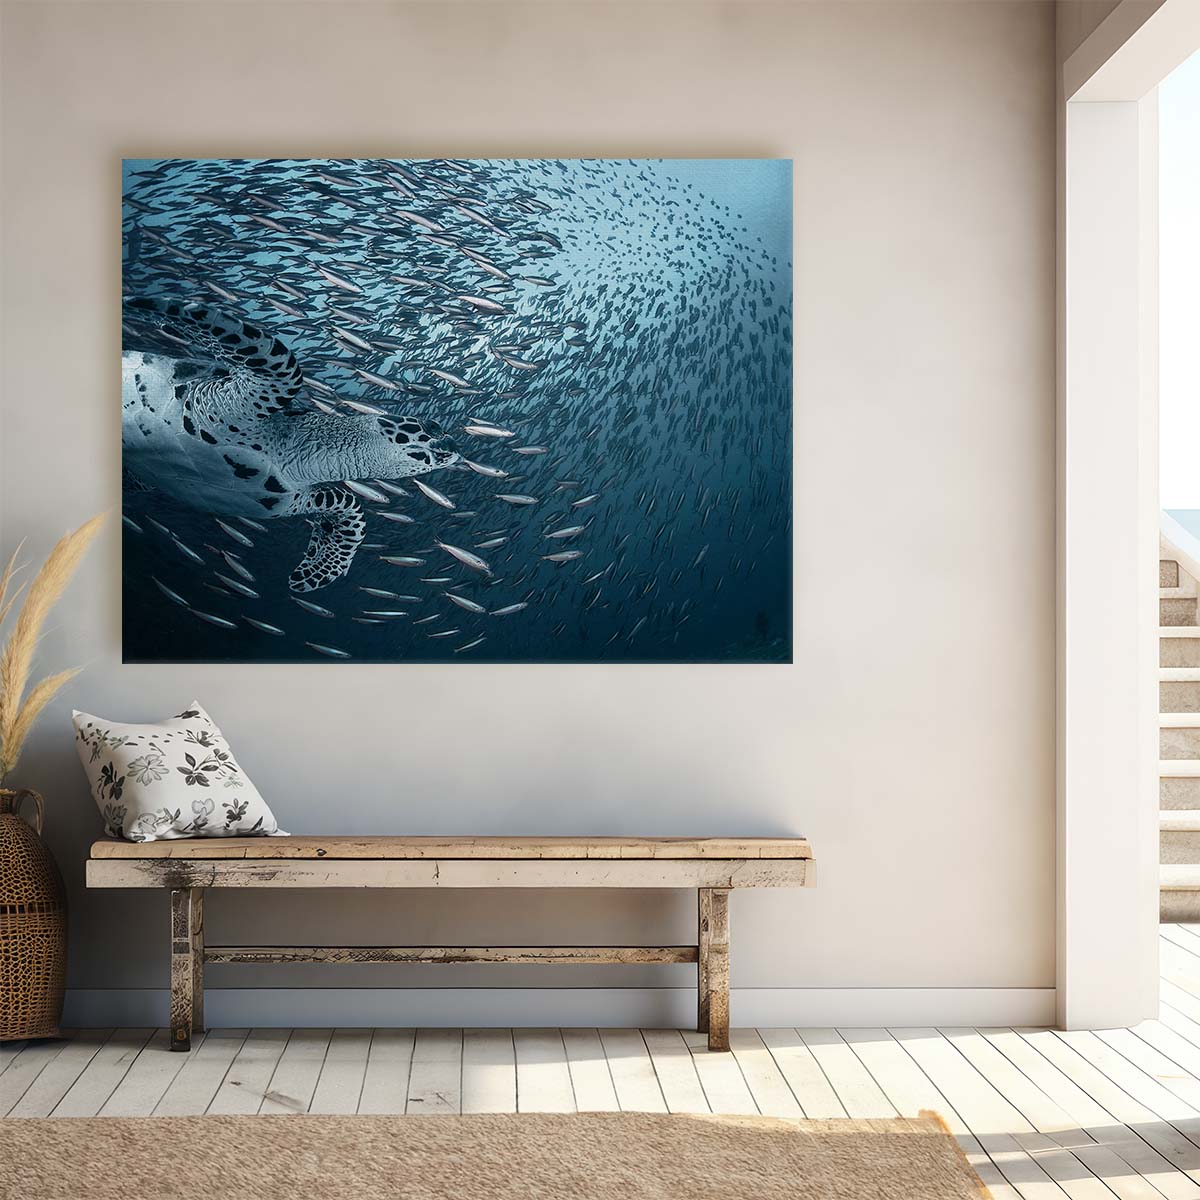 Similan Islands Sea Turtle & Sardine Shoal Wall Art by Luxuriance Designs. Made in USA.